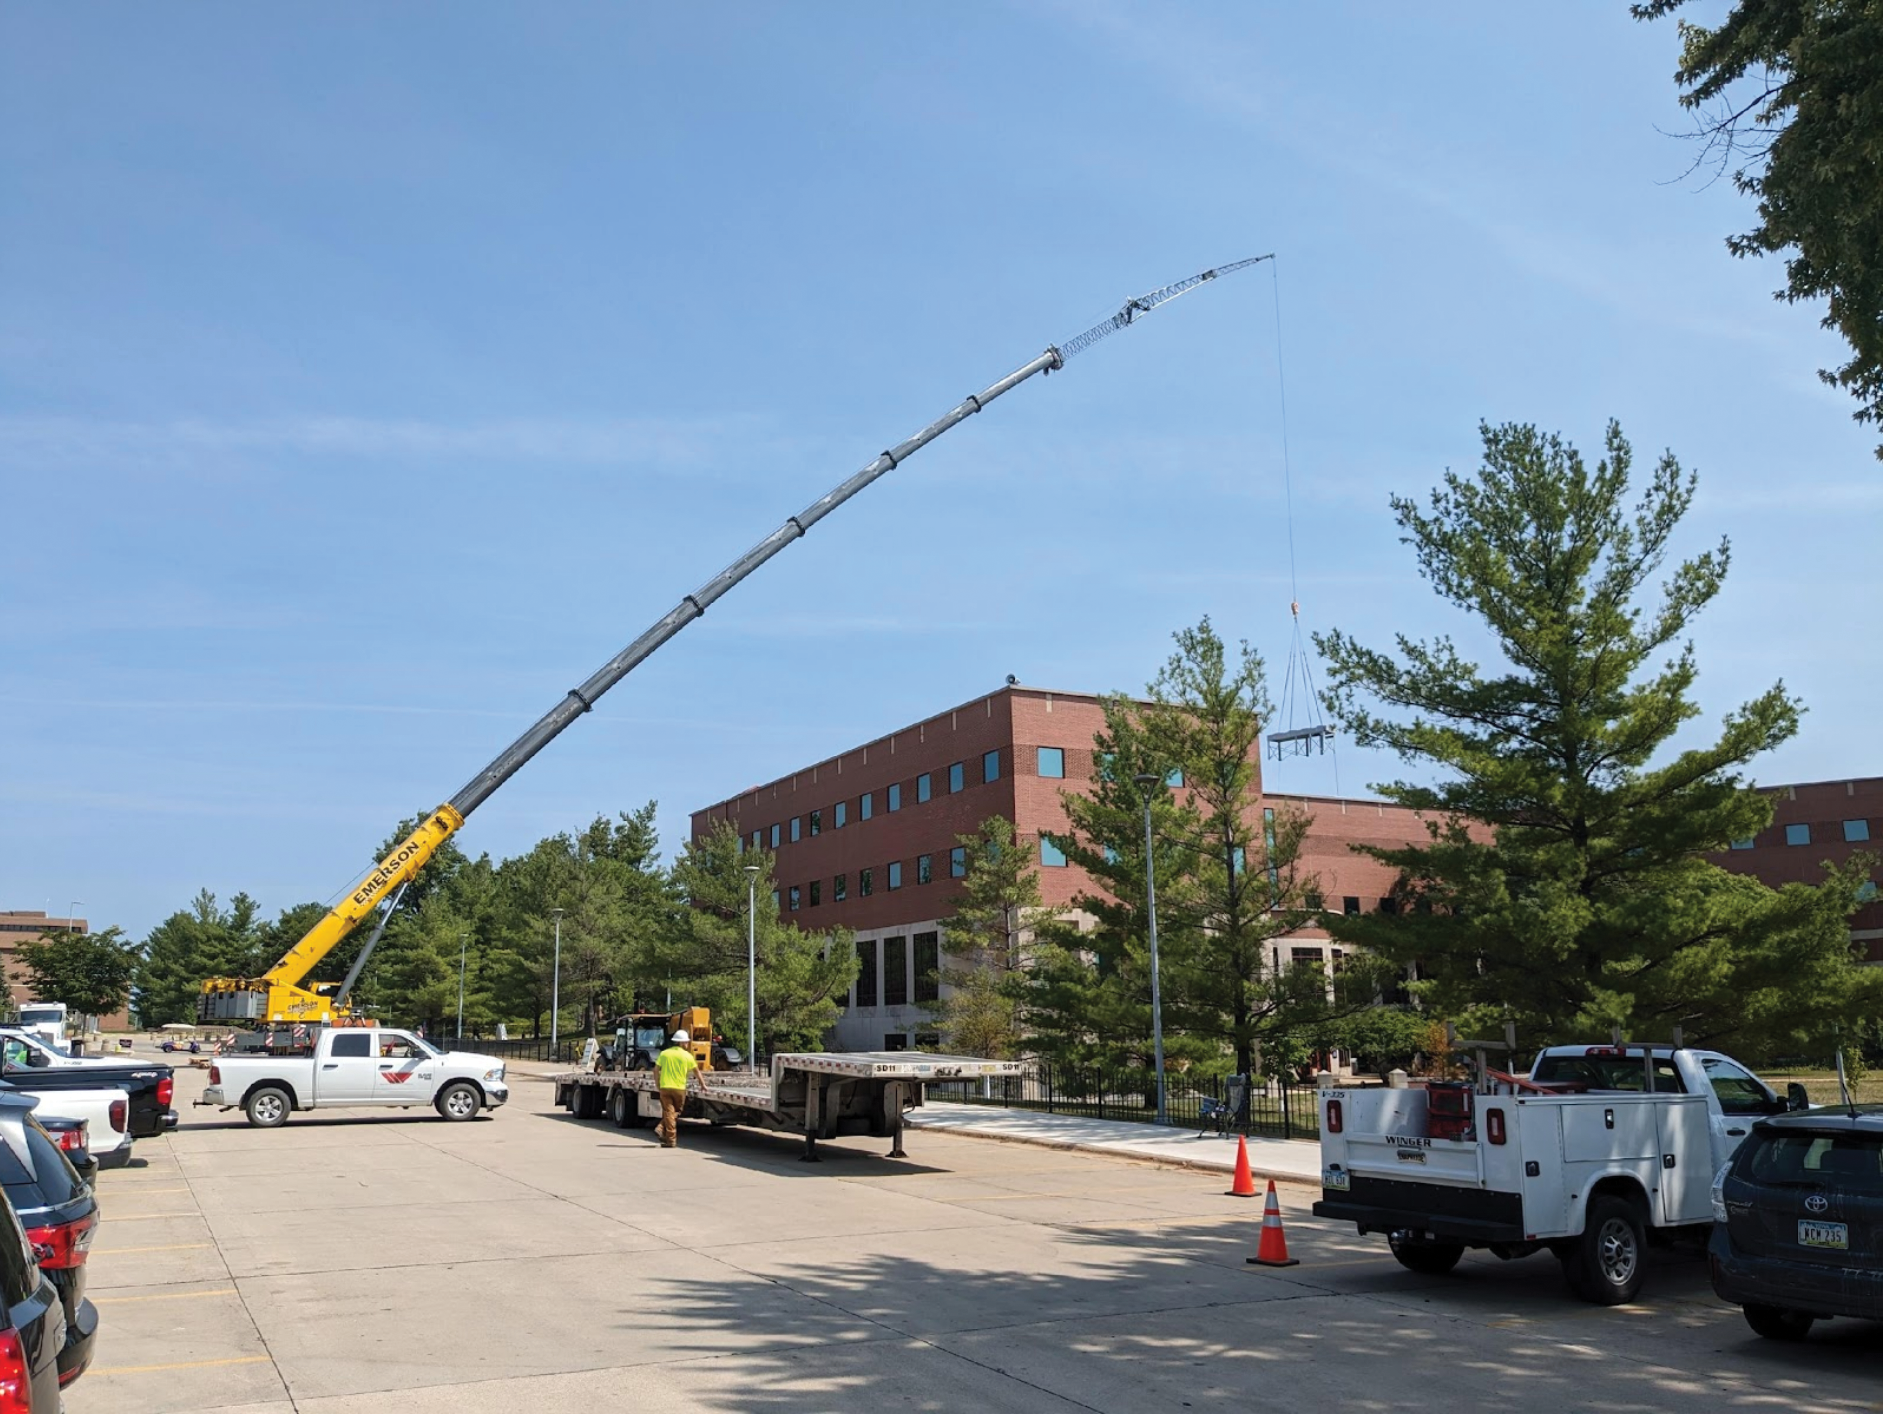 This summer, UNI Facilities installed a new HVAC system into Curris Business building, lifting the system over the building. The new HVAC system will prevent new servers from overheating.